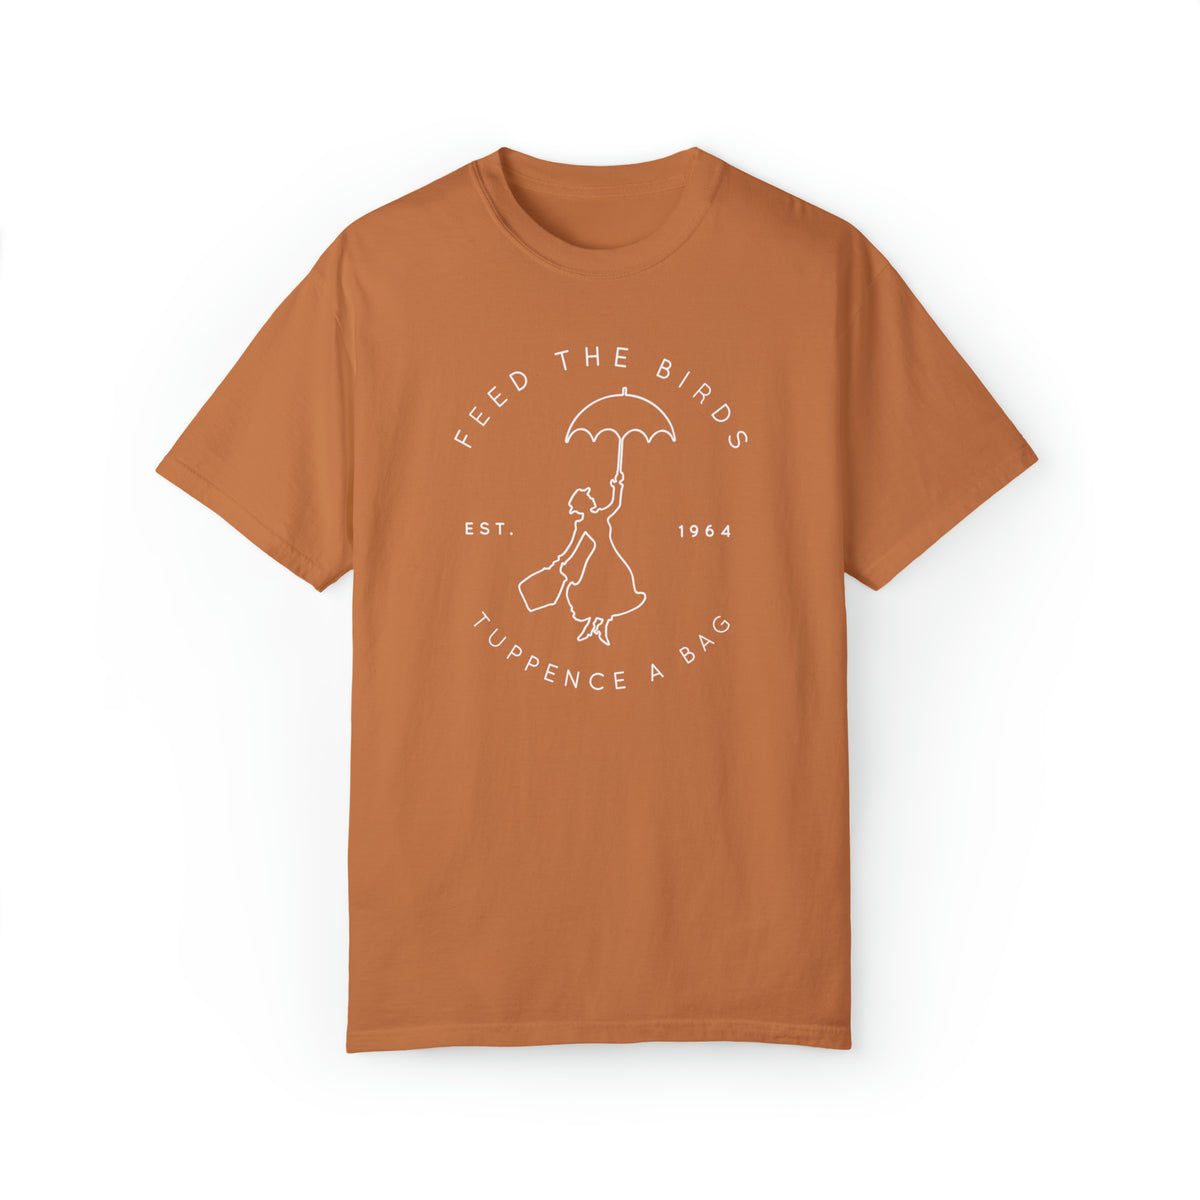 Feed the Birds Tuppence A Bag Comfort Colors Unisex Garment-Dyed T-shirt